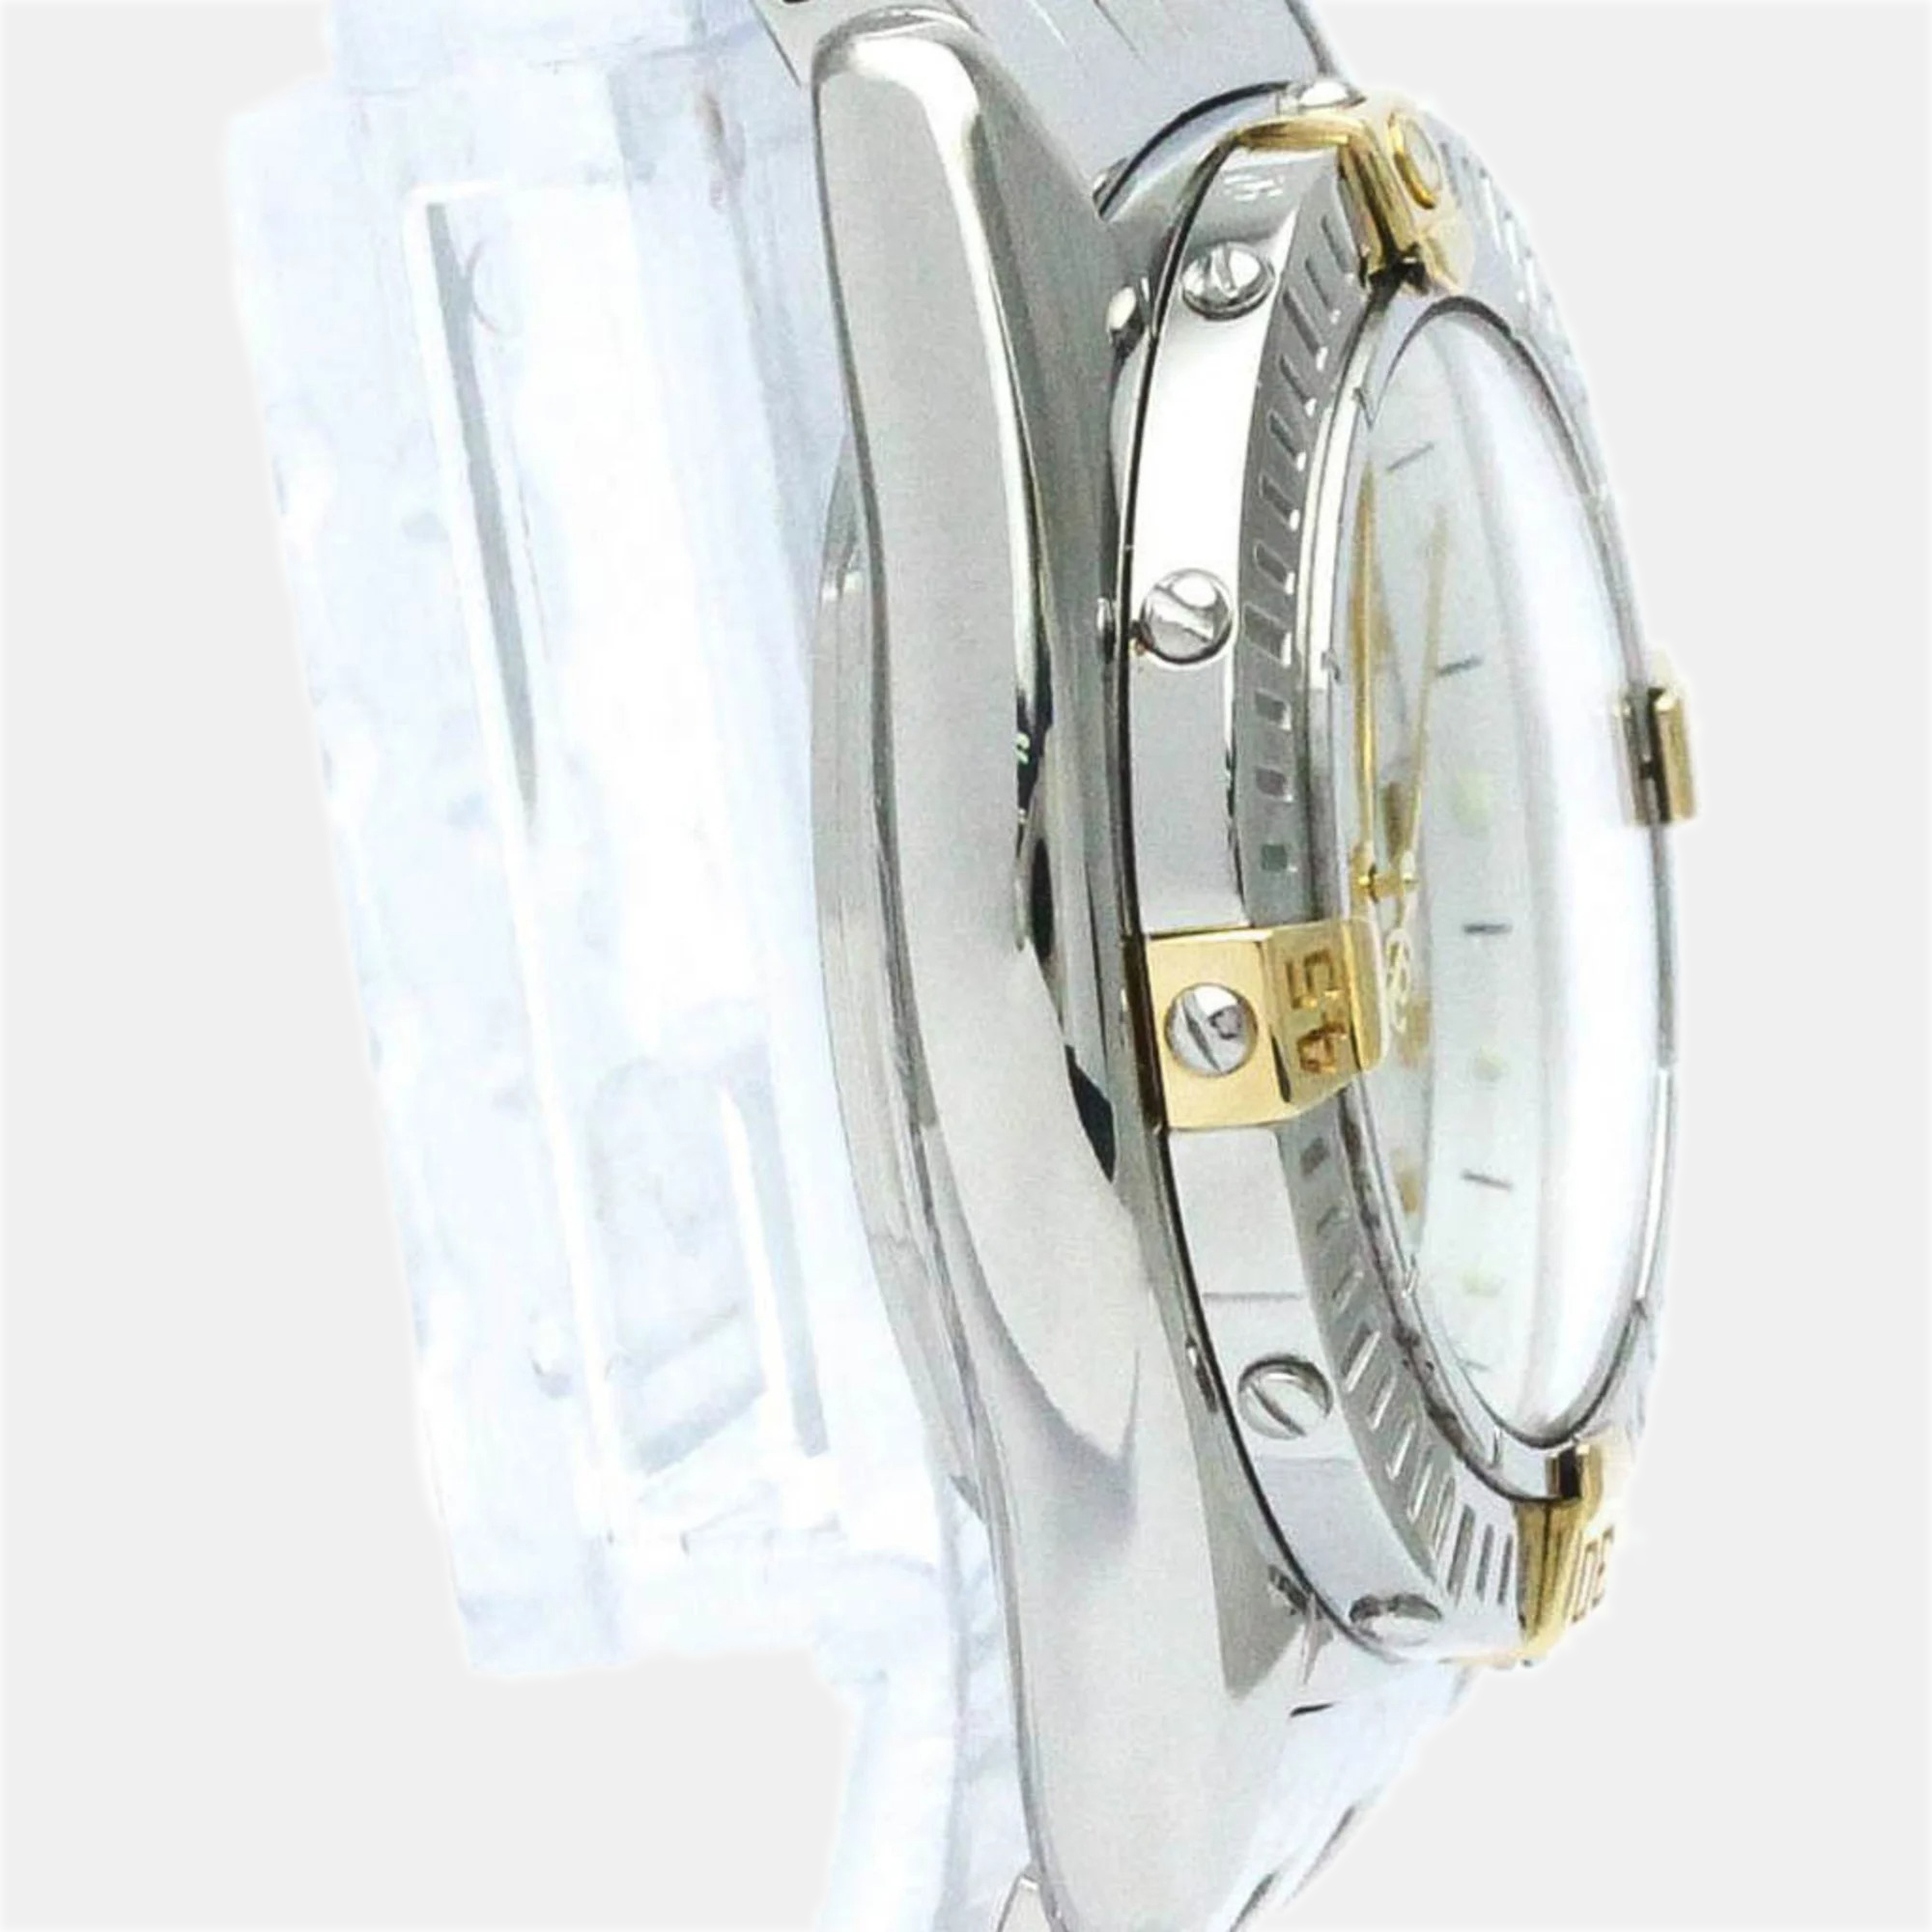 Breitling White Shell 18k Yellow Gold And Stainless Steel Callistino Quartz Women's Wristwatch 27 Mm